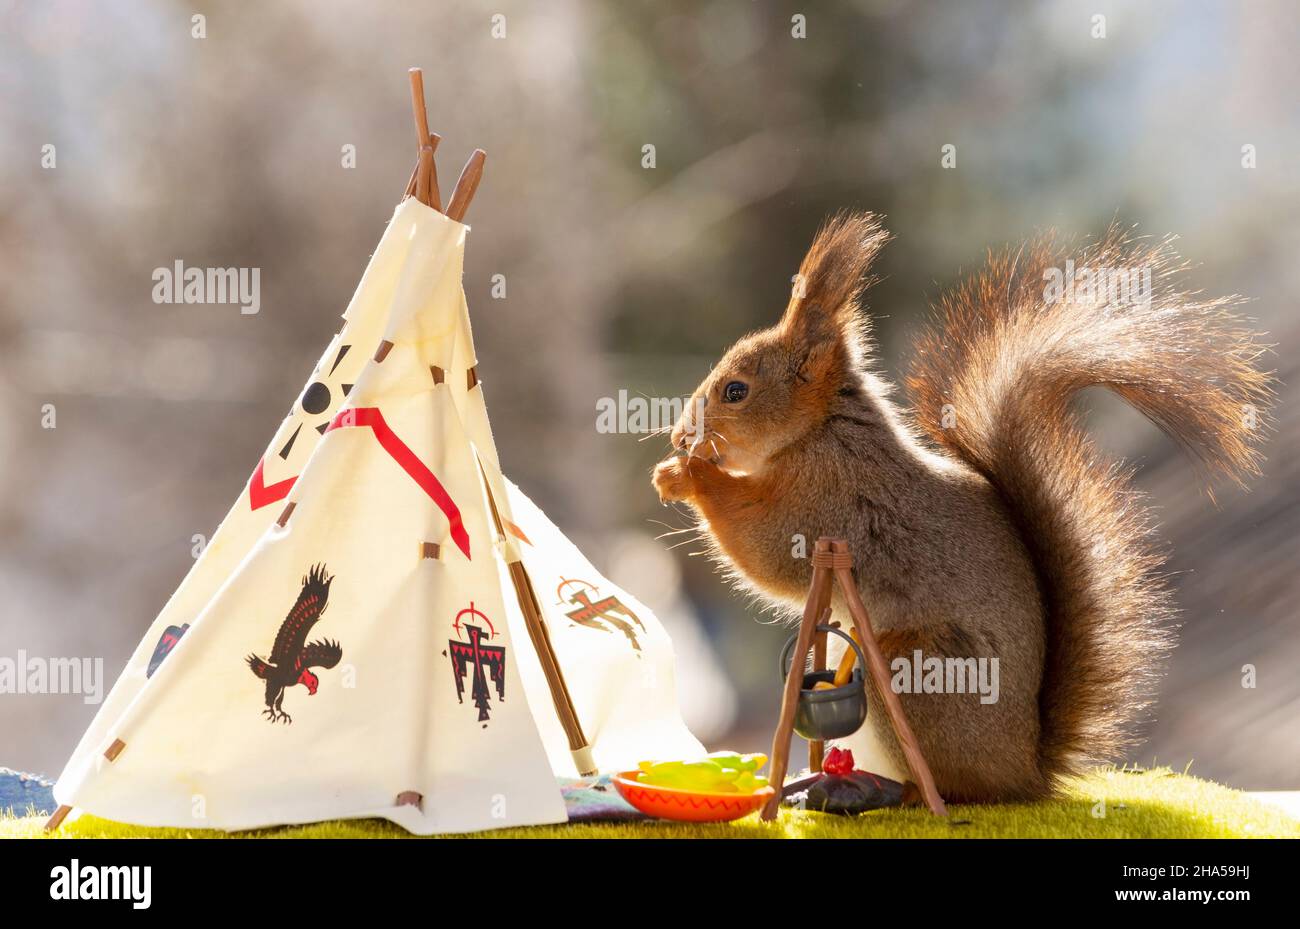 red squirrel is standing with a fire place and teepee Stock Photo